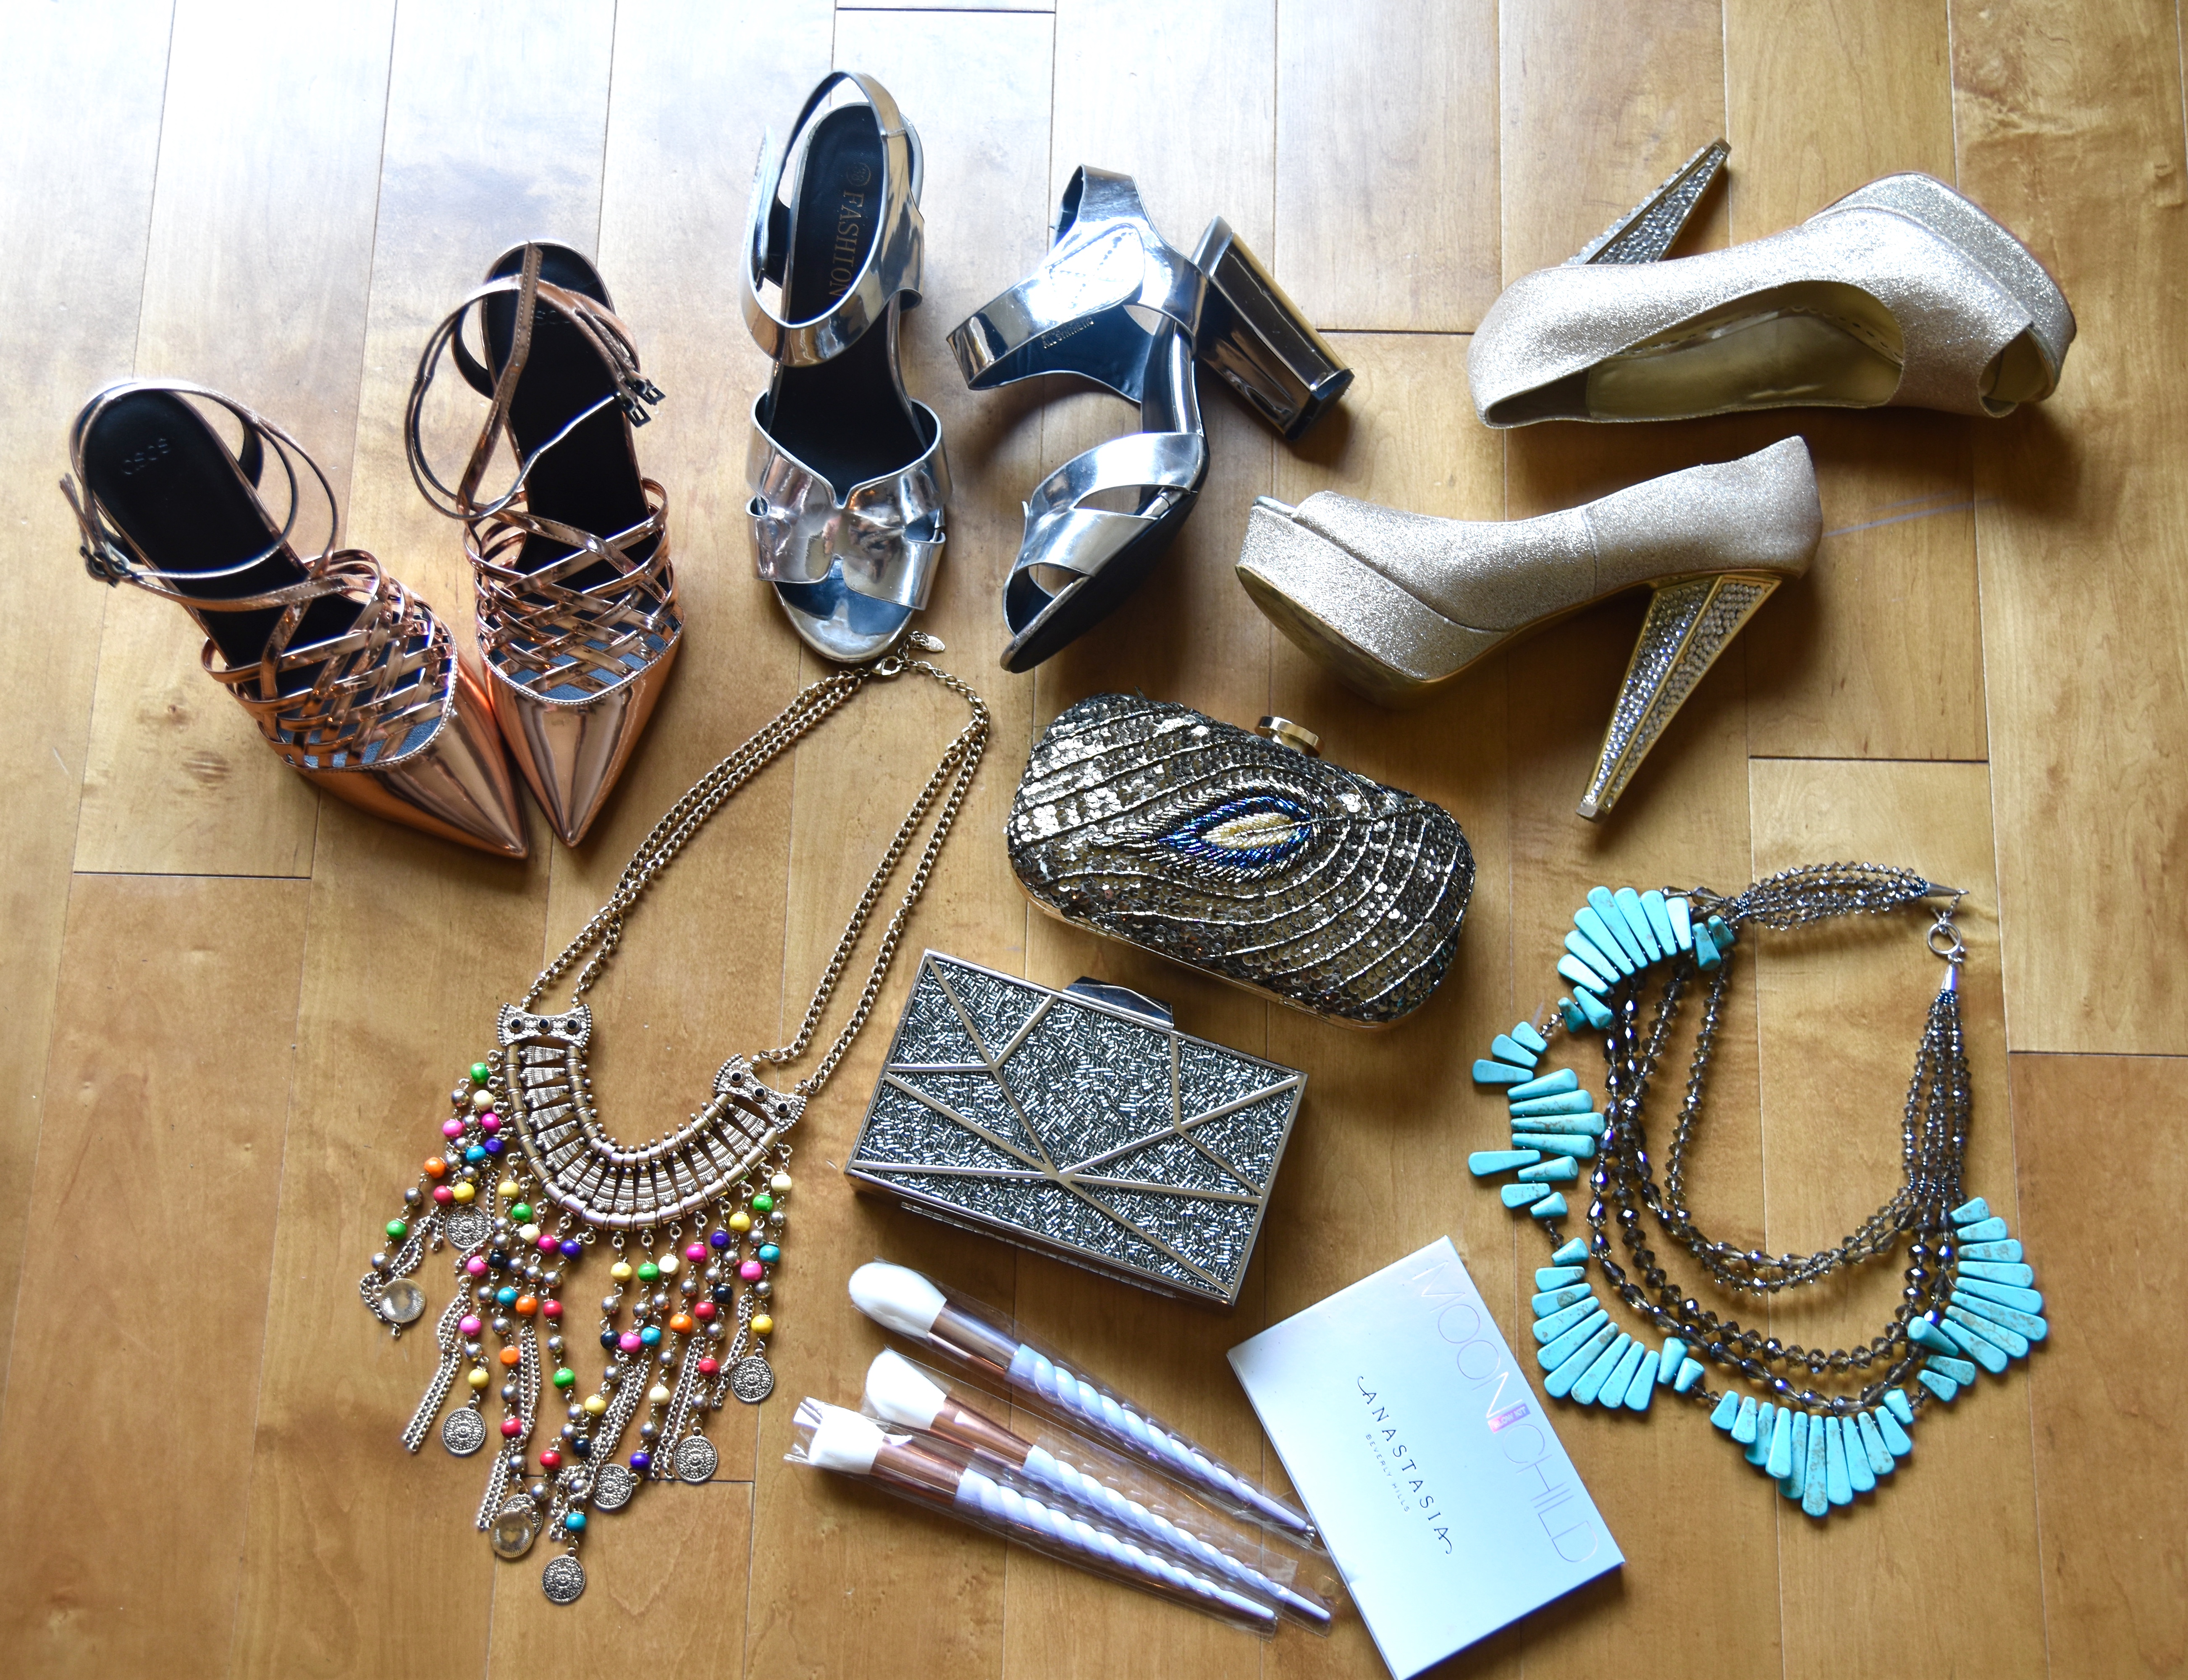 Metallic shoes, highlighting palette, necklaces, sequin clutches